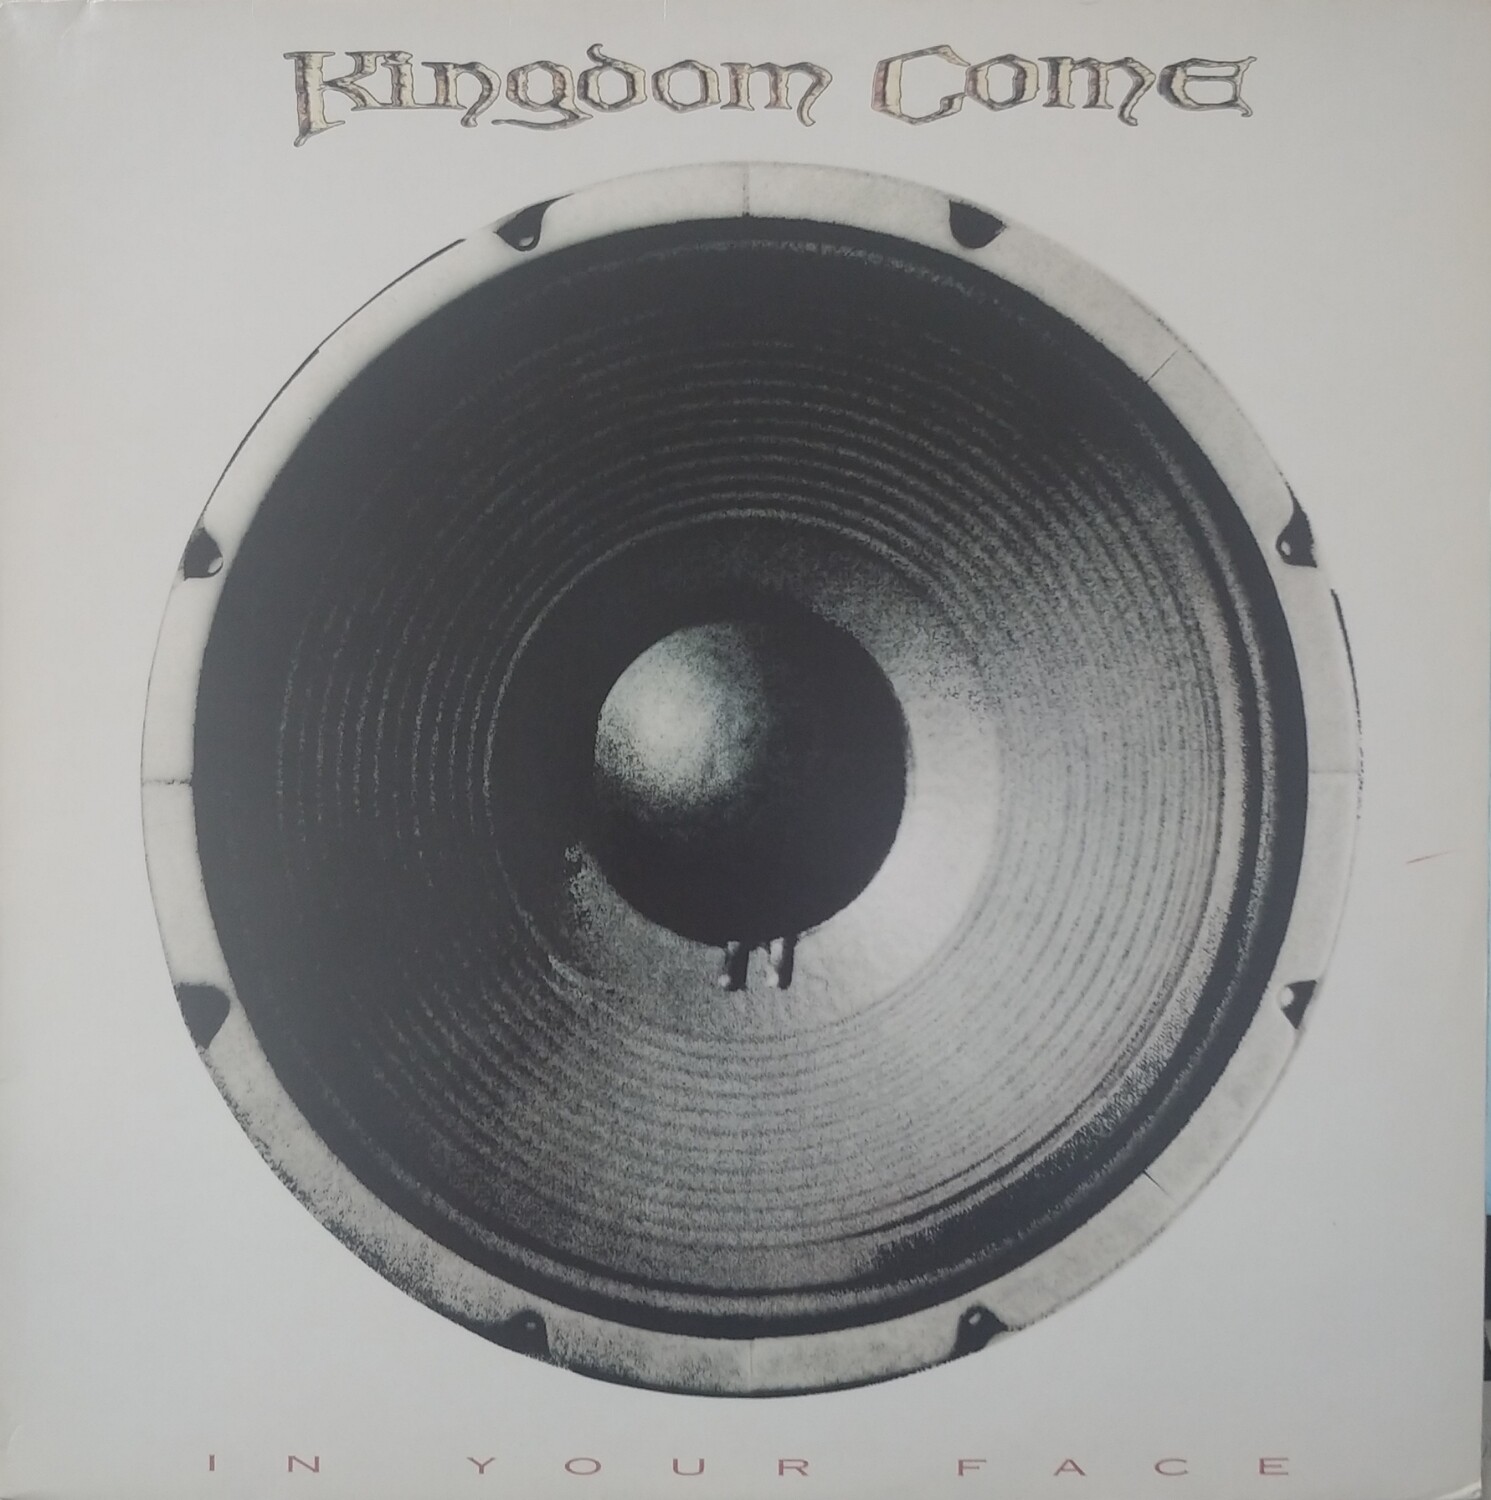 Kingdom Come - In your face